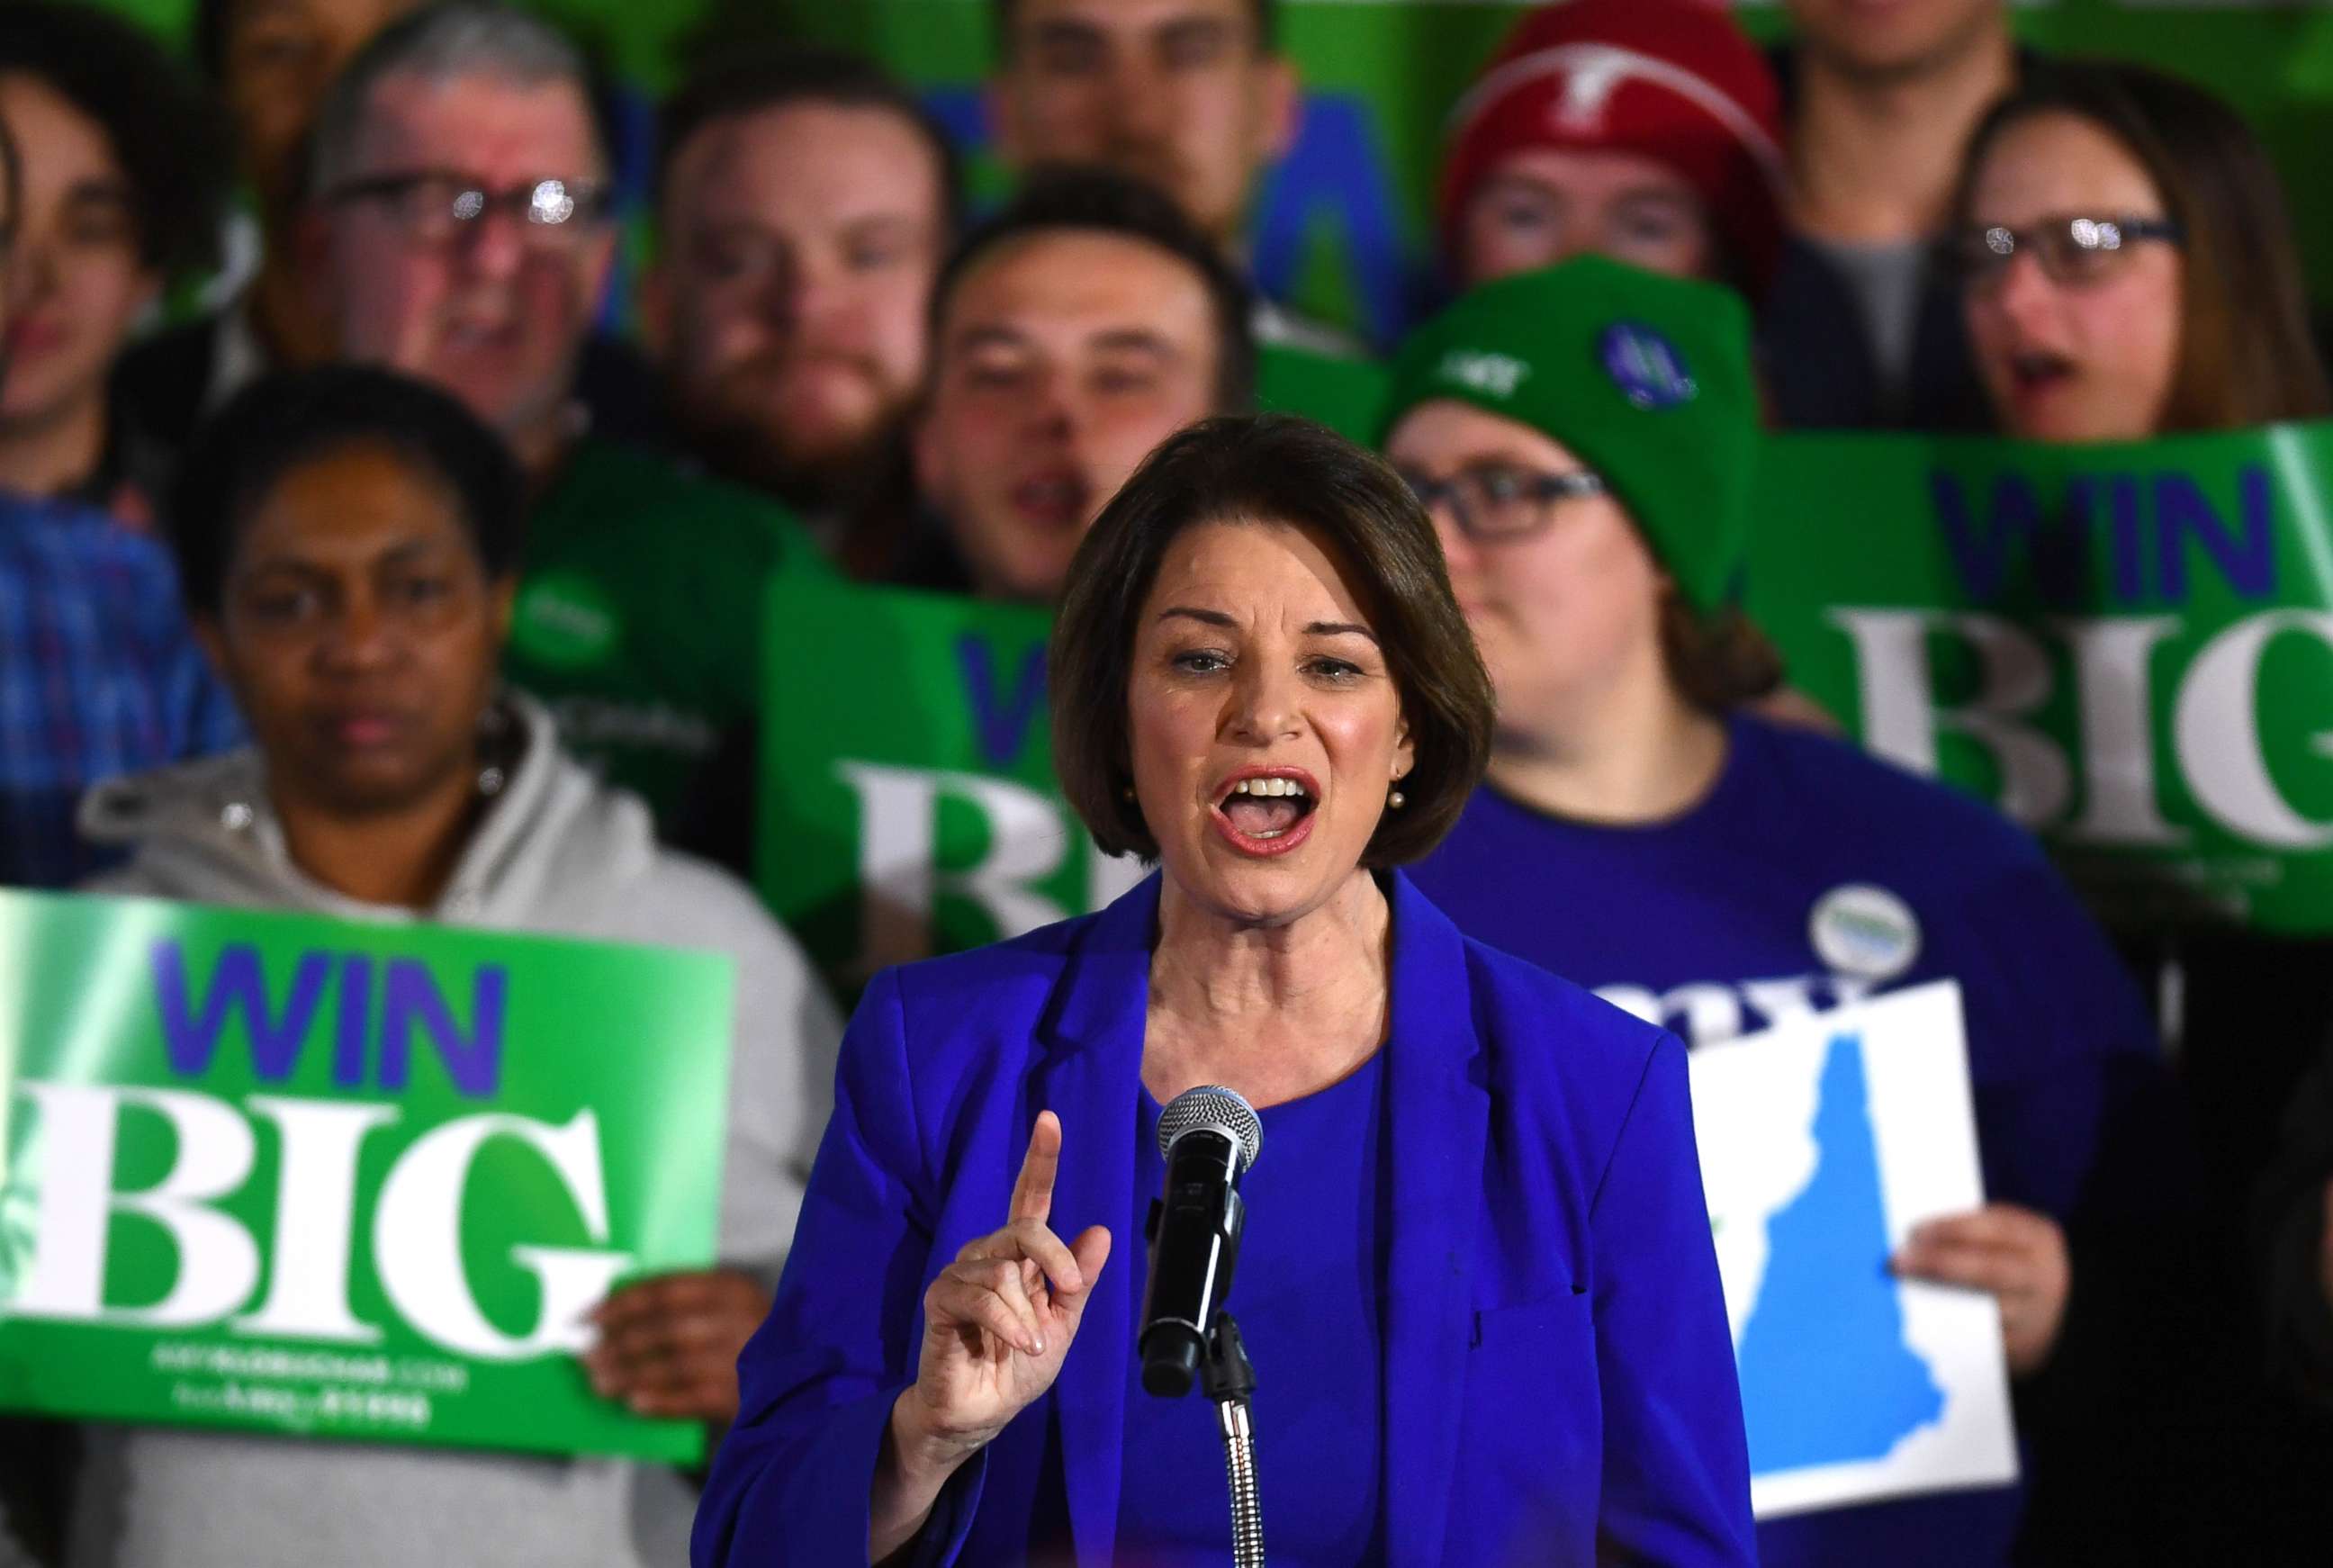 PHOTO: Democratic presidential candidate Senator Amy Klobuchar speaks to supporters at her New Hampshire primary night rally in Concord, N.H., Feb. 11, 2020.